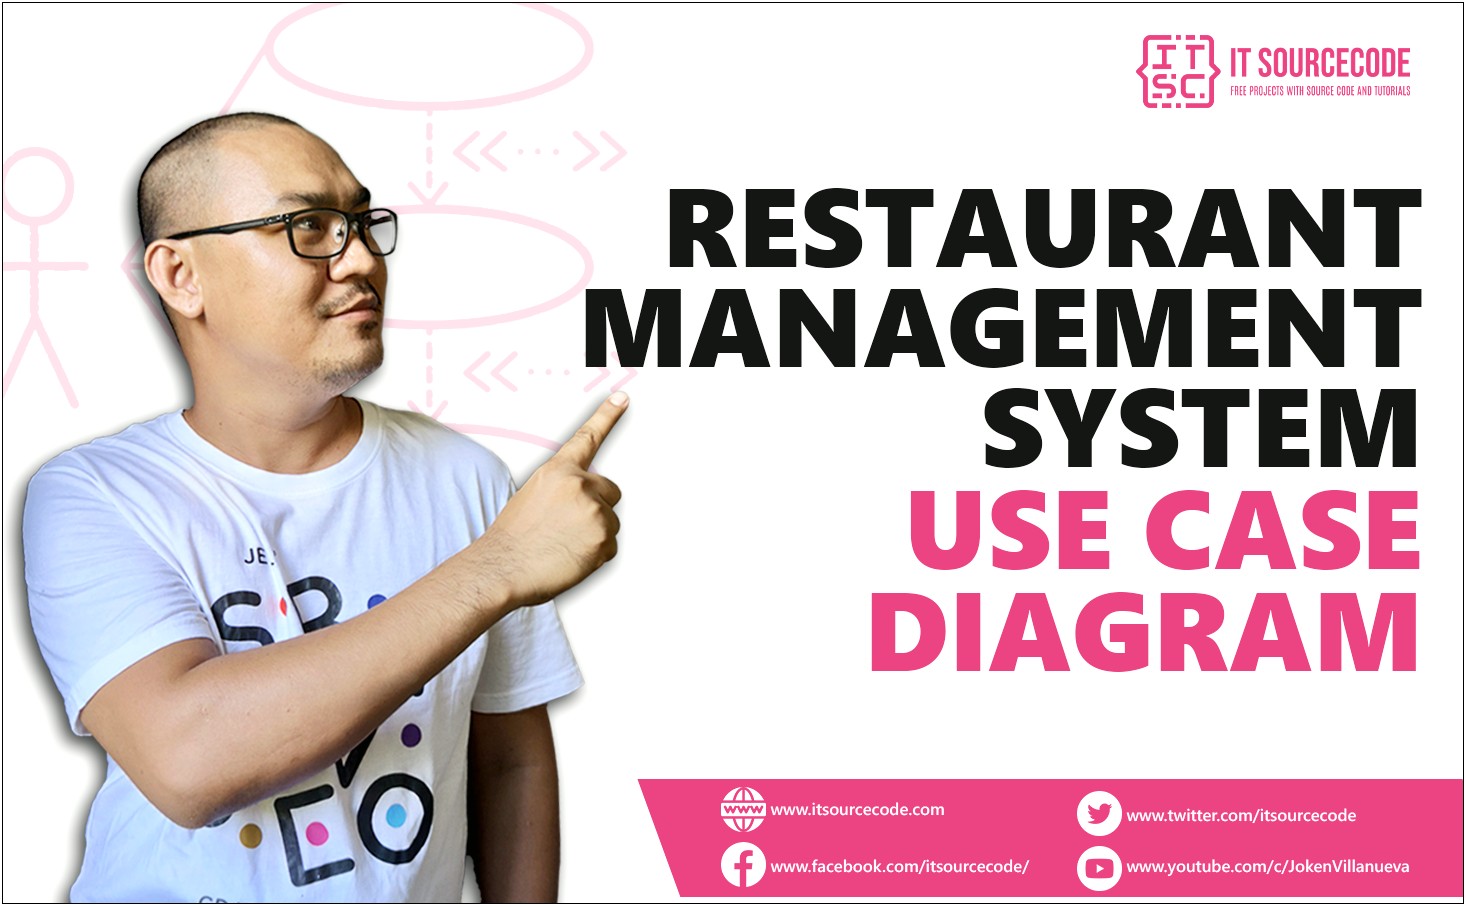 restaurant-management-system-free-template-download-templates-resume-designs-8a1bwekvq7